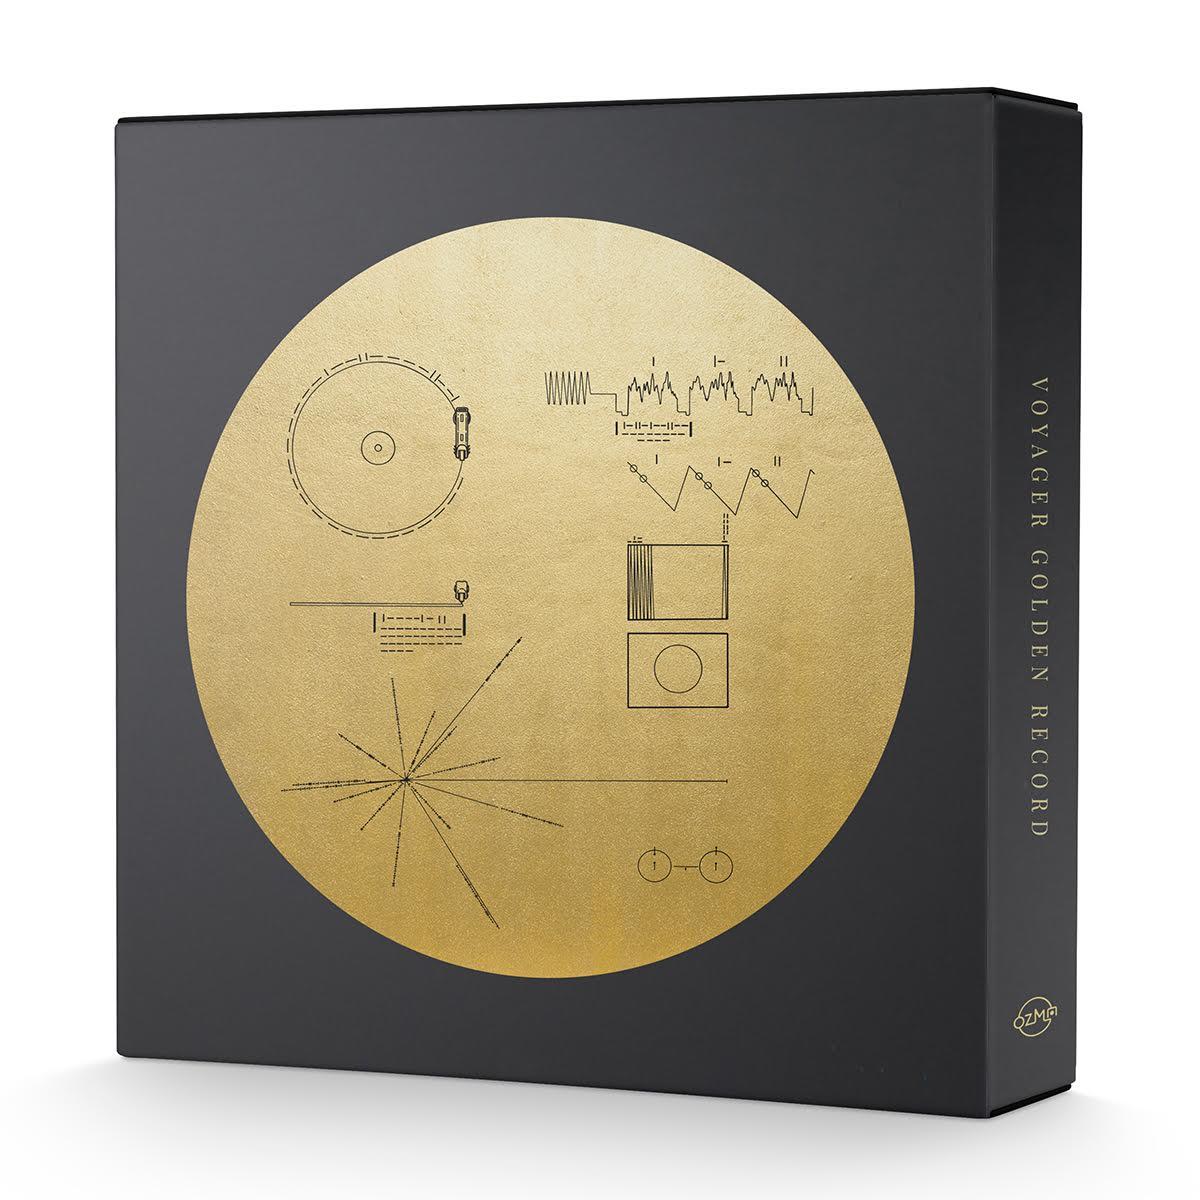 Attention People of Earth: The ‘Golden Record’ Can Be Yours